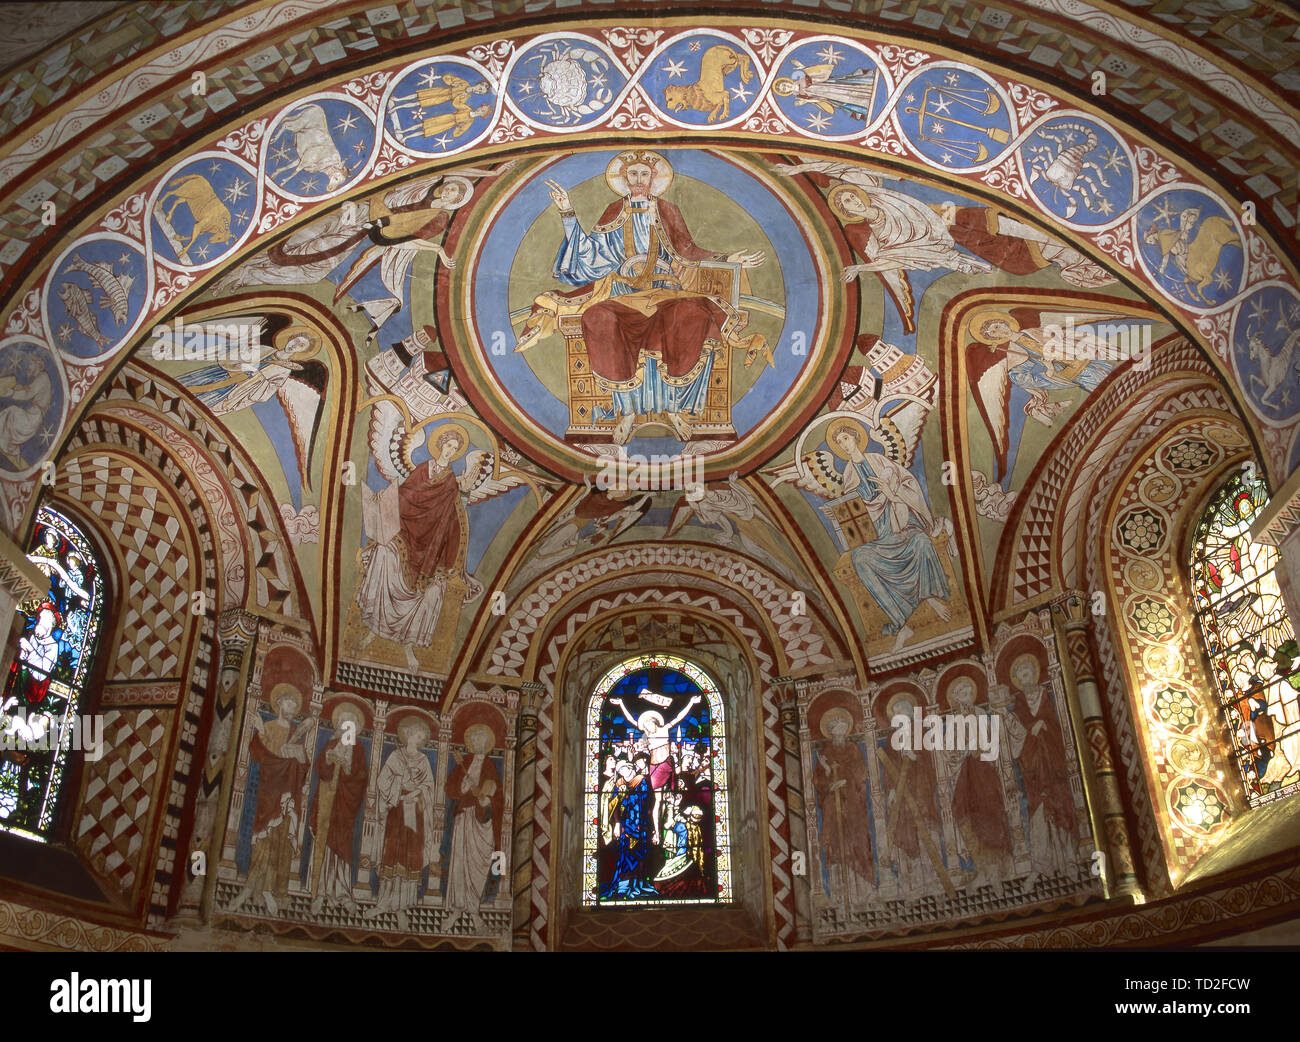 Apse ceiling paintings at St Michael and All Angels church, Copford, Essex, UK. Stock Photo